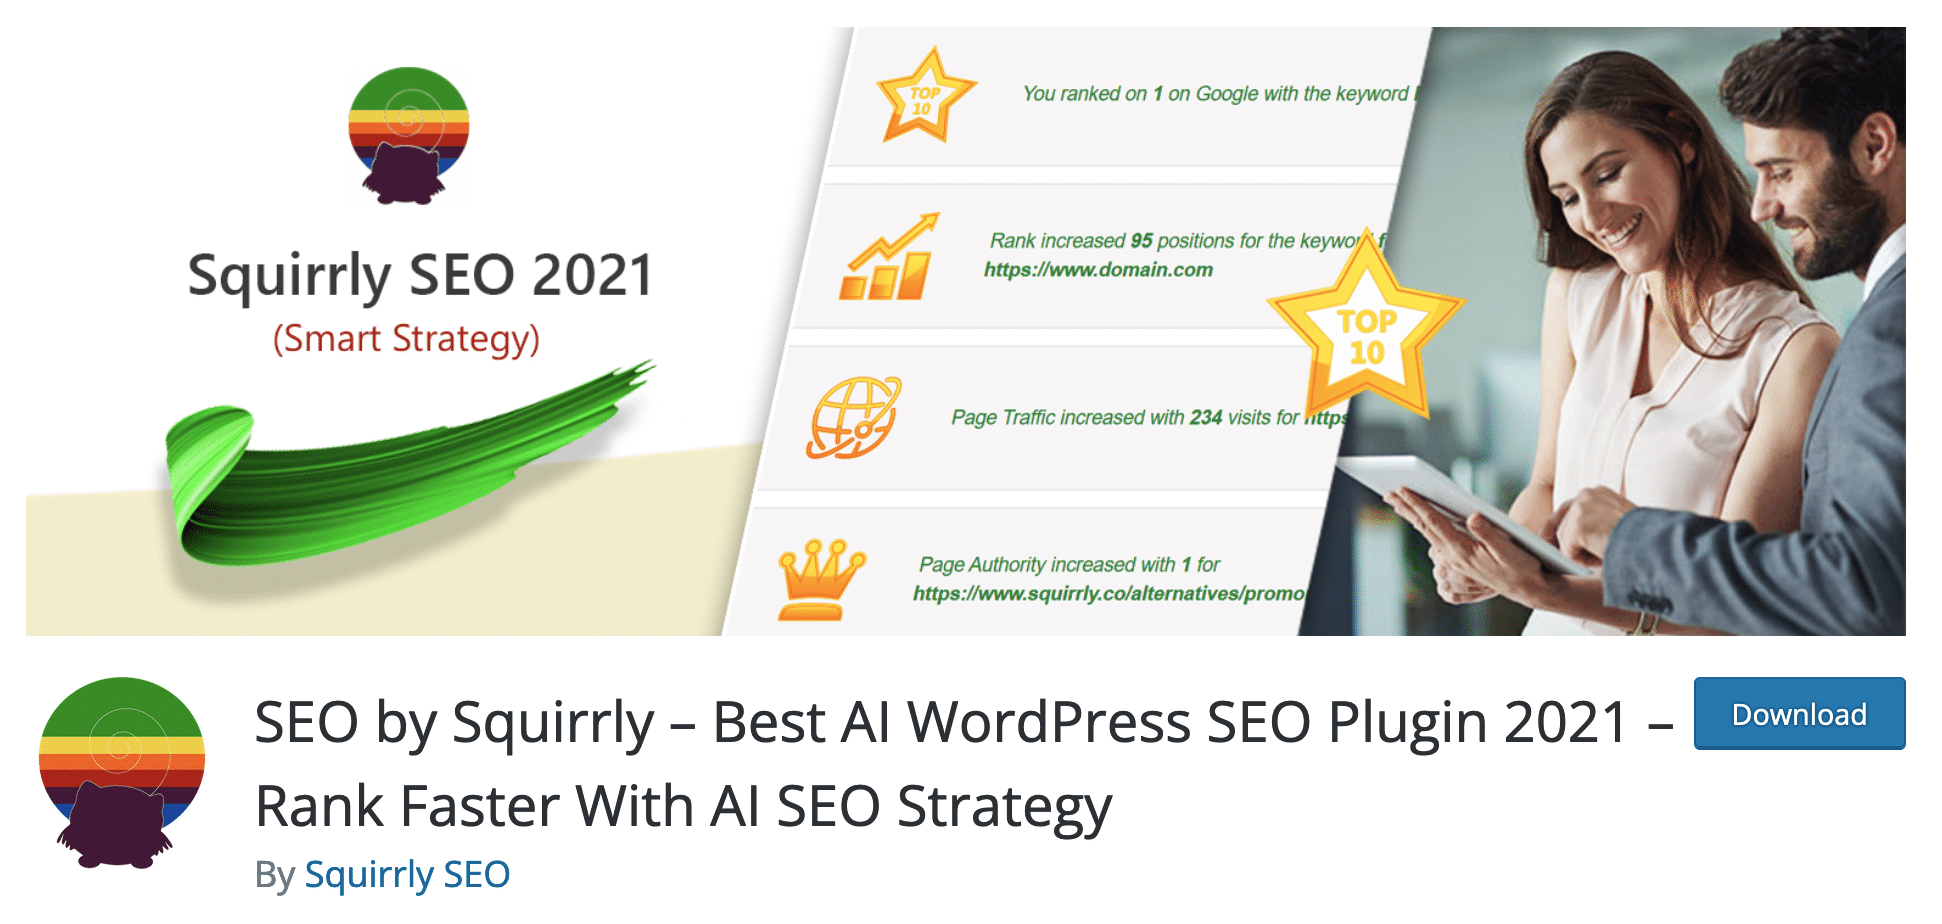 Squirrly is an SEO plugin for WordPress that relies on artificial intelligence.